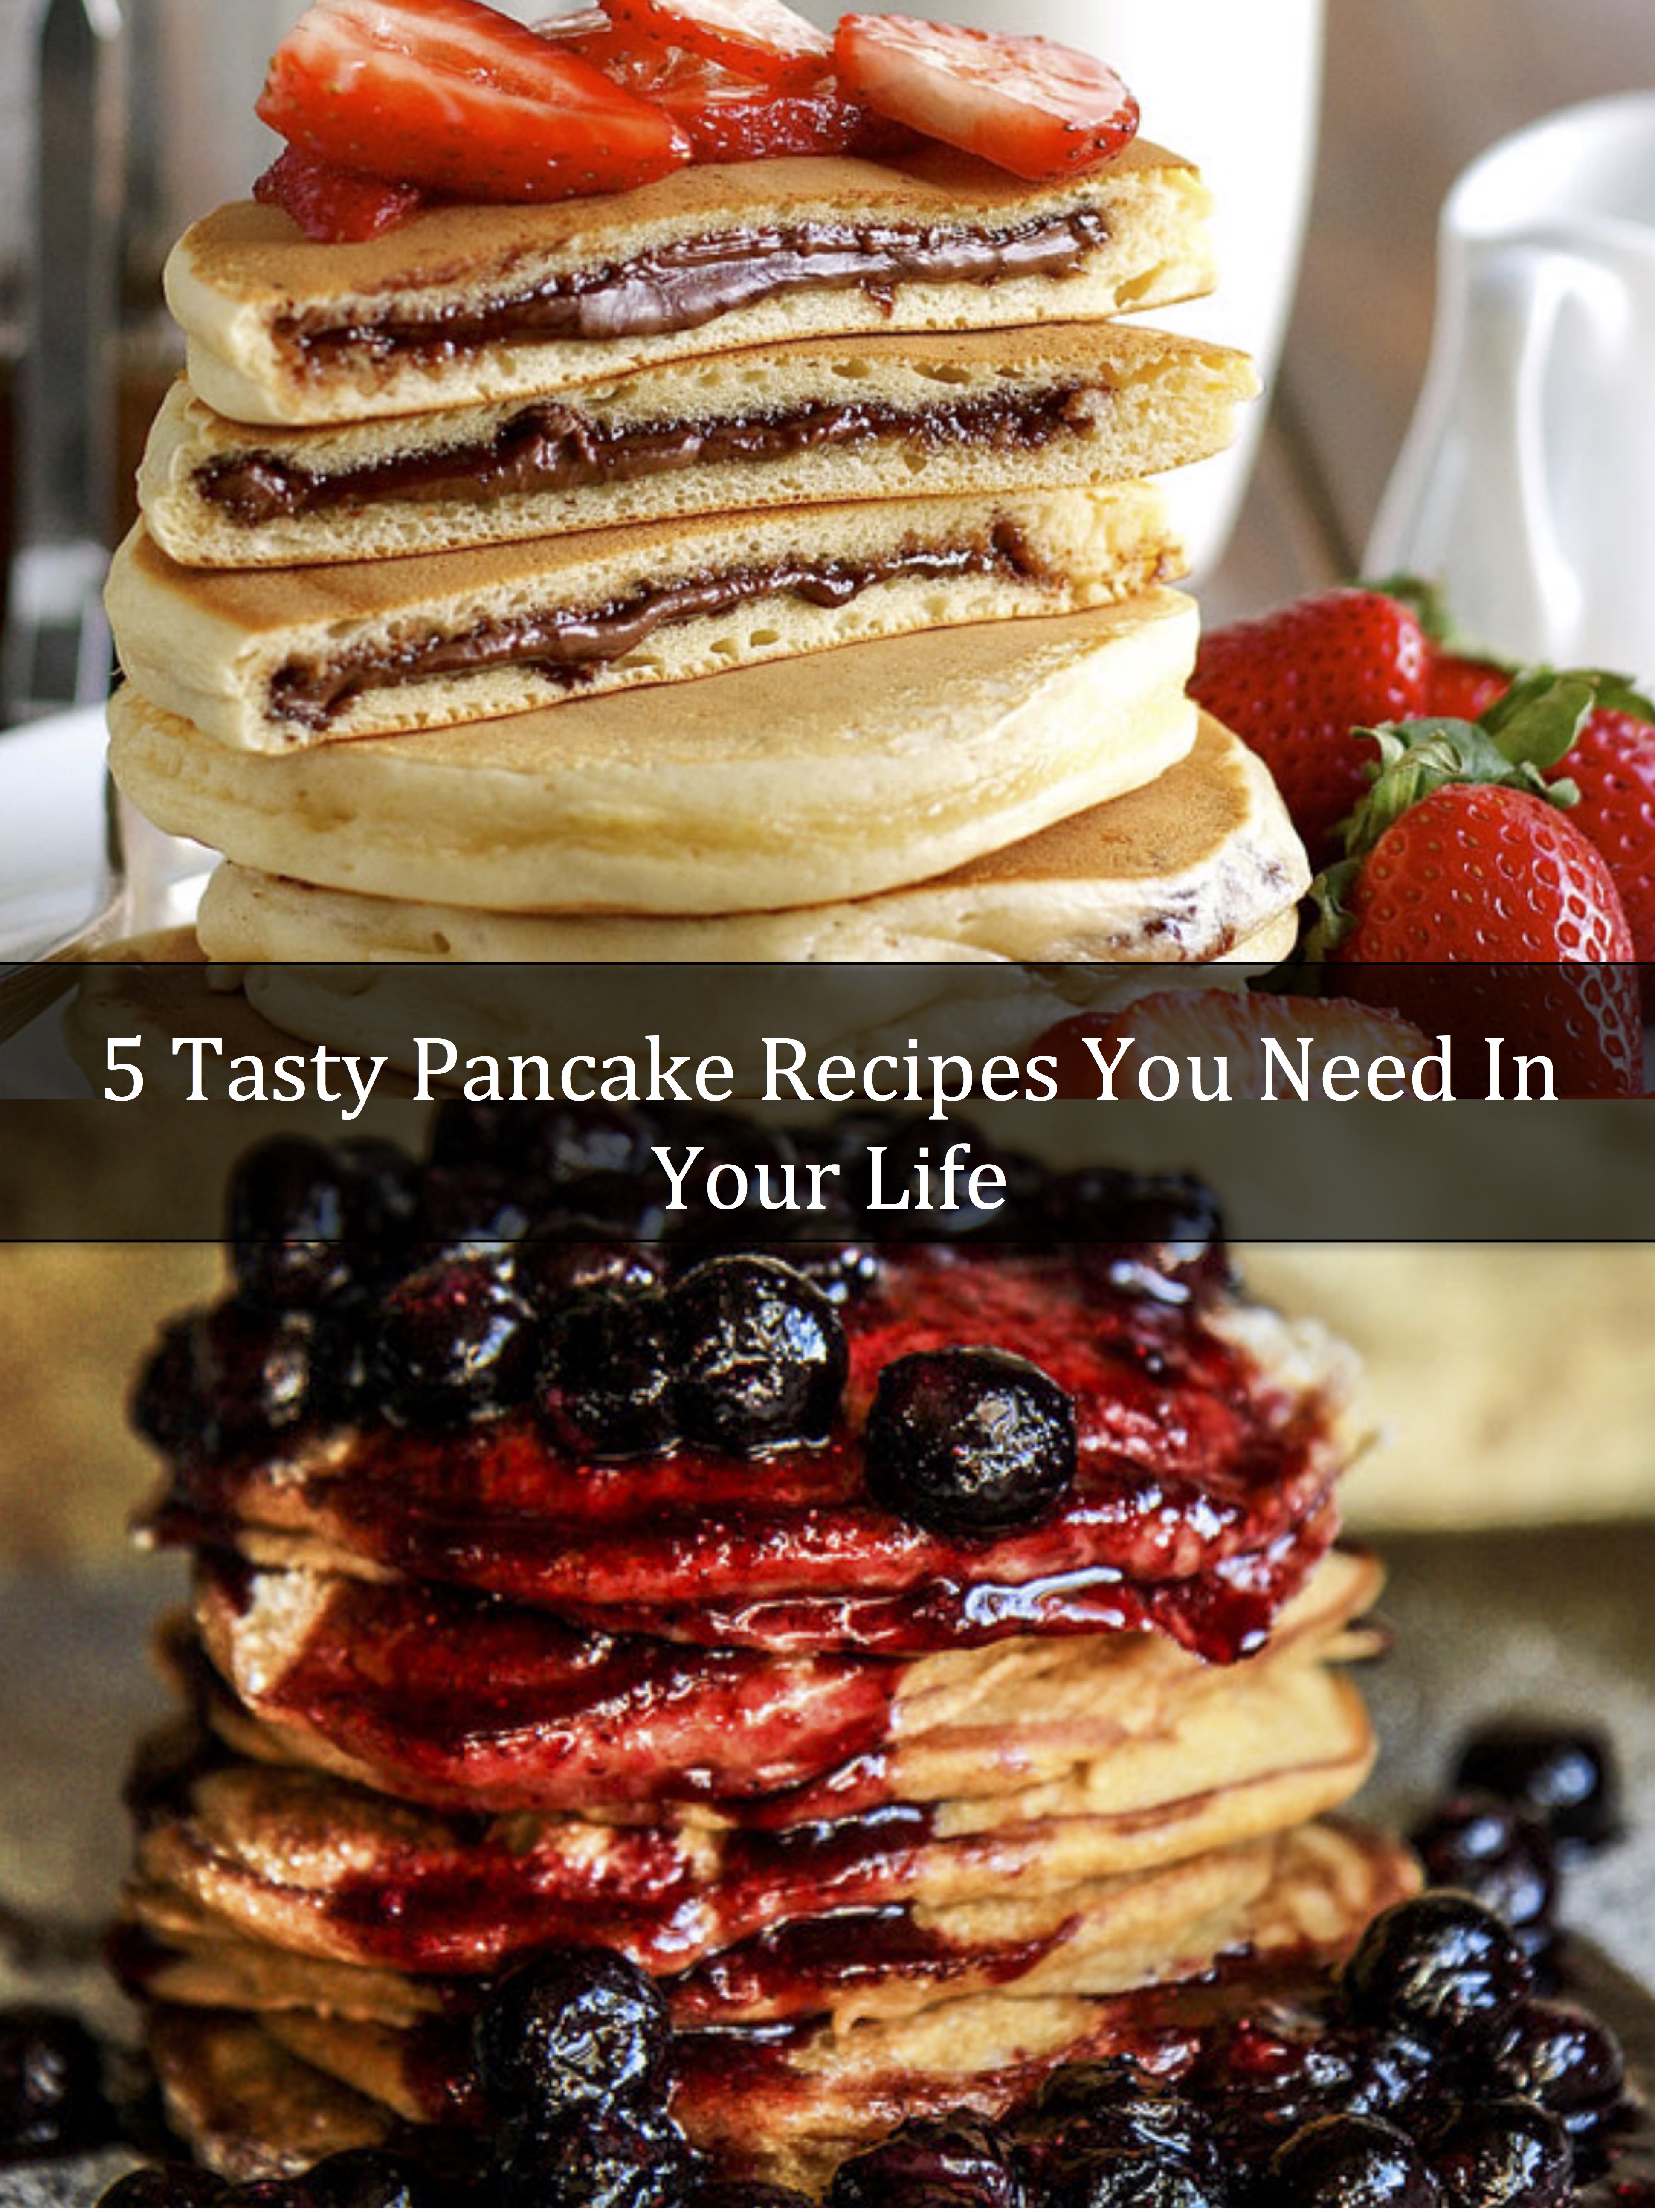 5 Tasty Pancake Recipes You Need in Your Life